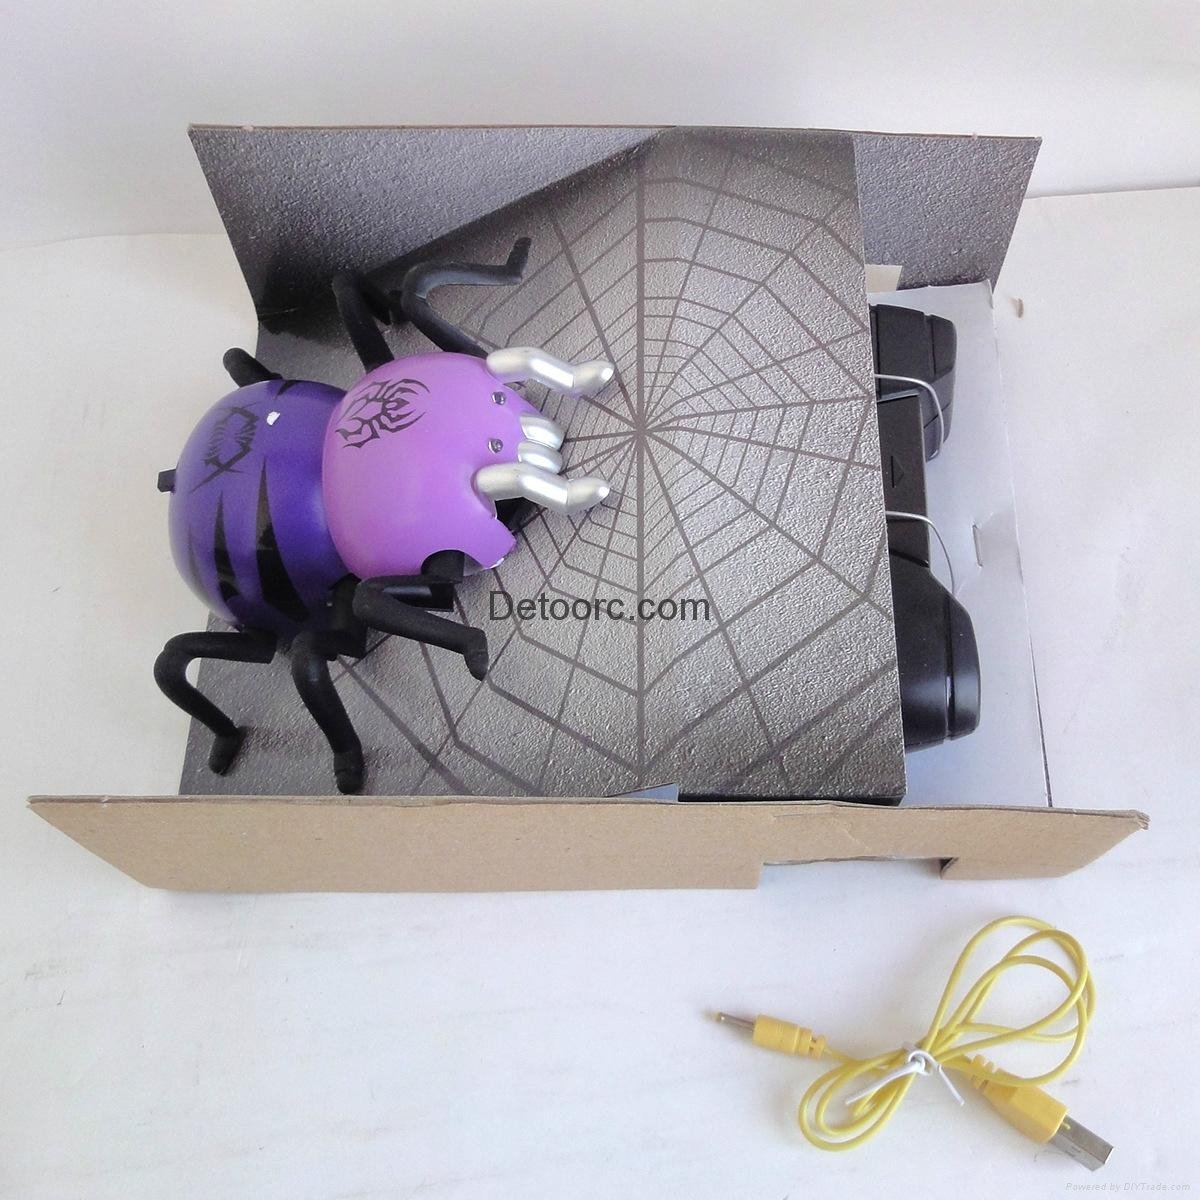  moving animal rc toys spider remote control for kids simulation toys wall climb 4